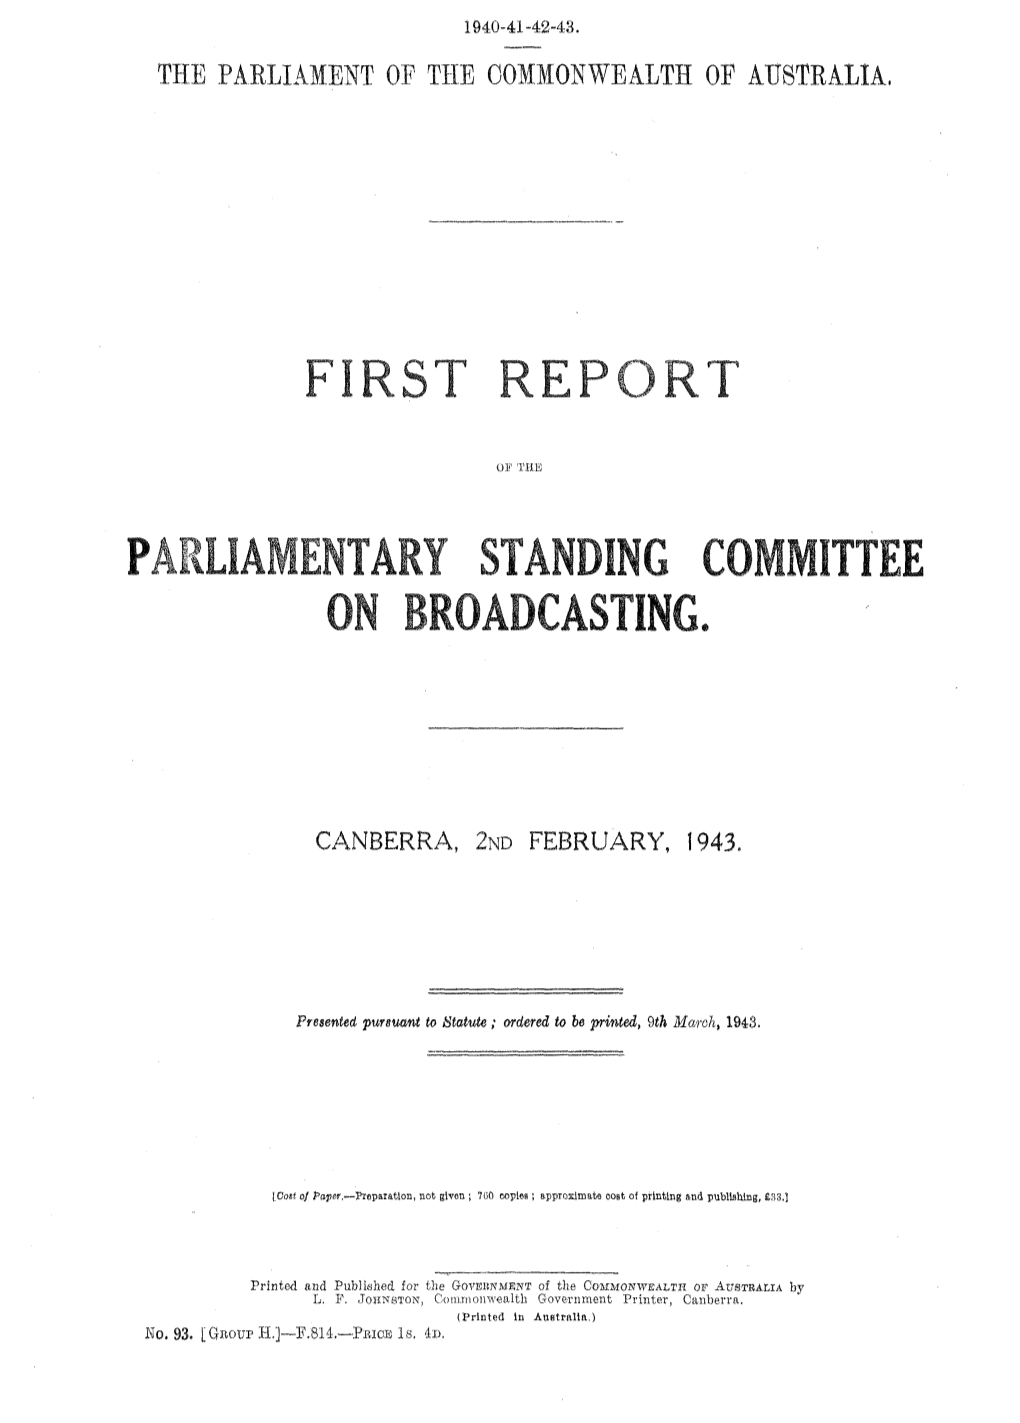 The Parliament of the Commonwealth of Australia, Canberra, 2Nd February, 1943